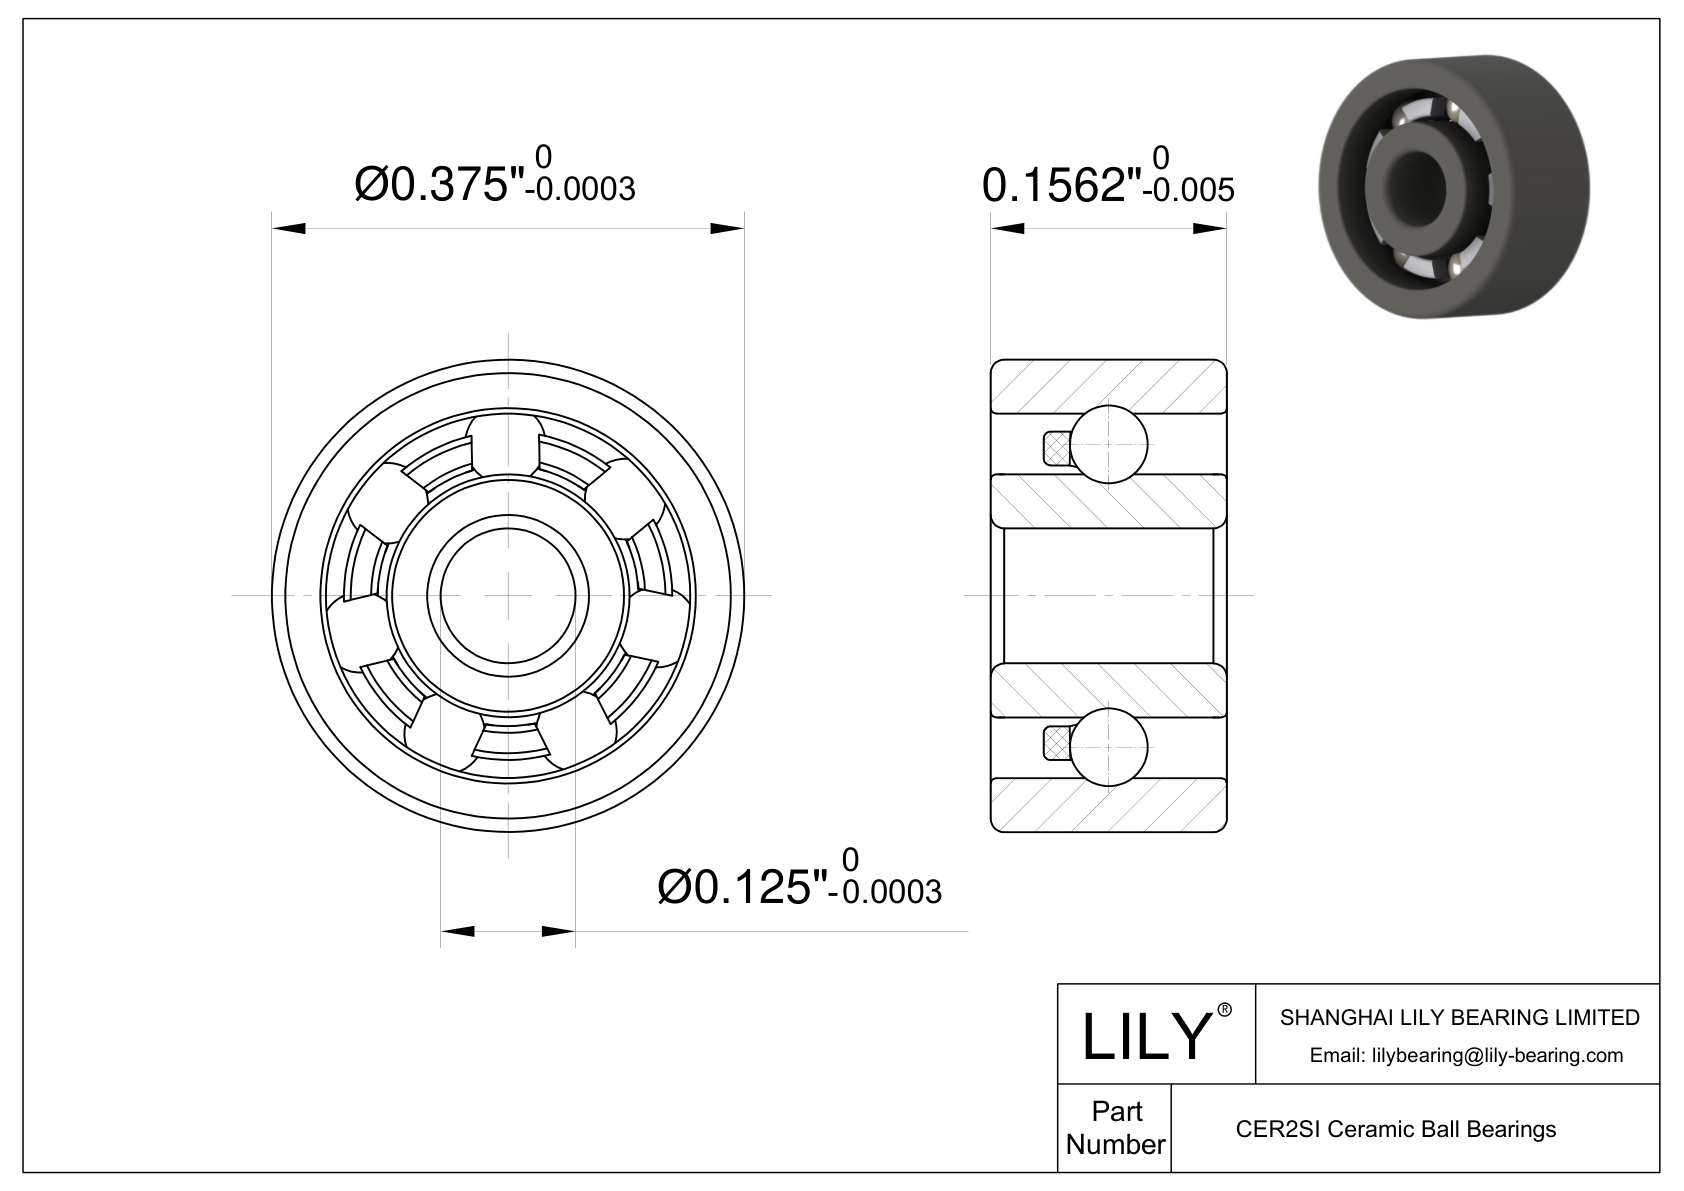 CESI R2 Inch Size Silicon Nitride Ceramic Bearings cad drawing